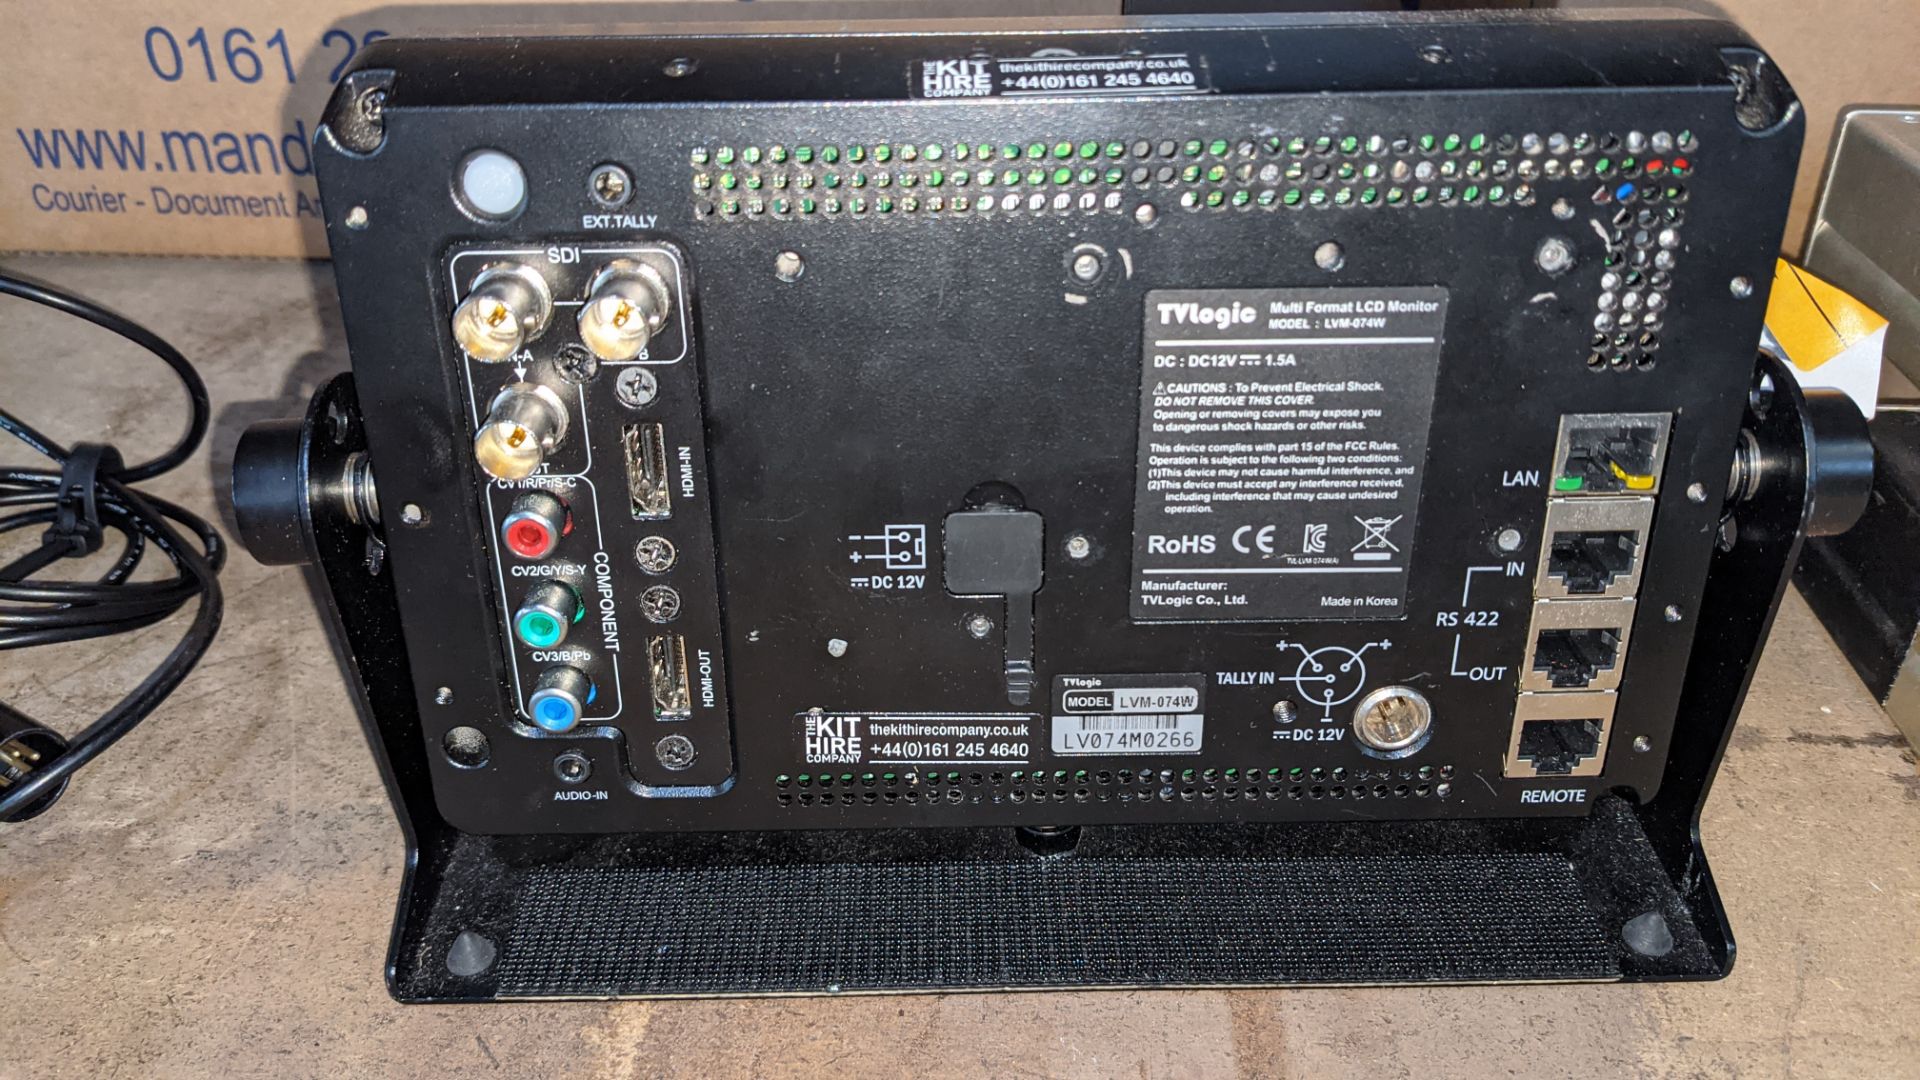 TVLogic multi format LCD monitor model LVM-074W, including hinged bracket - NB No power supply - Image 2 of 11